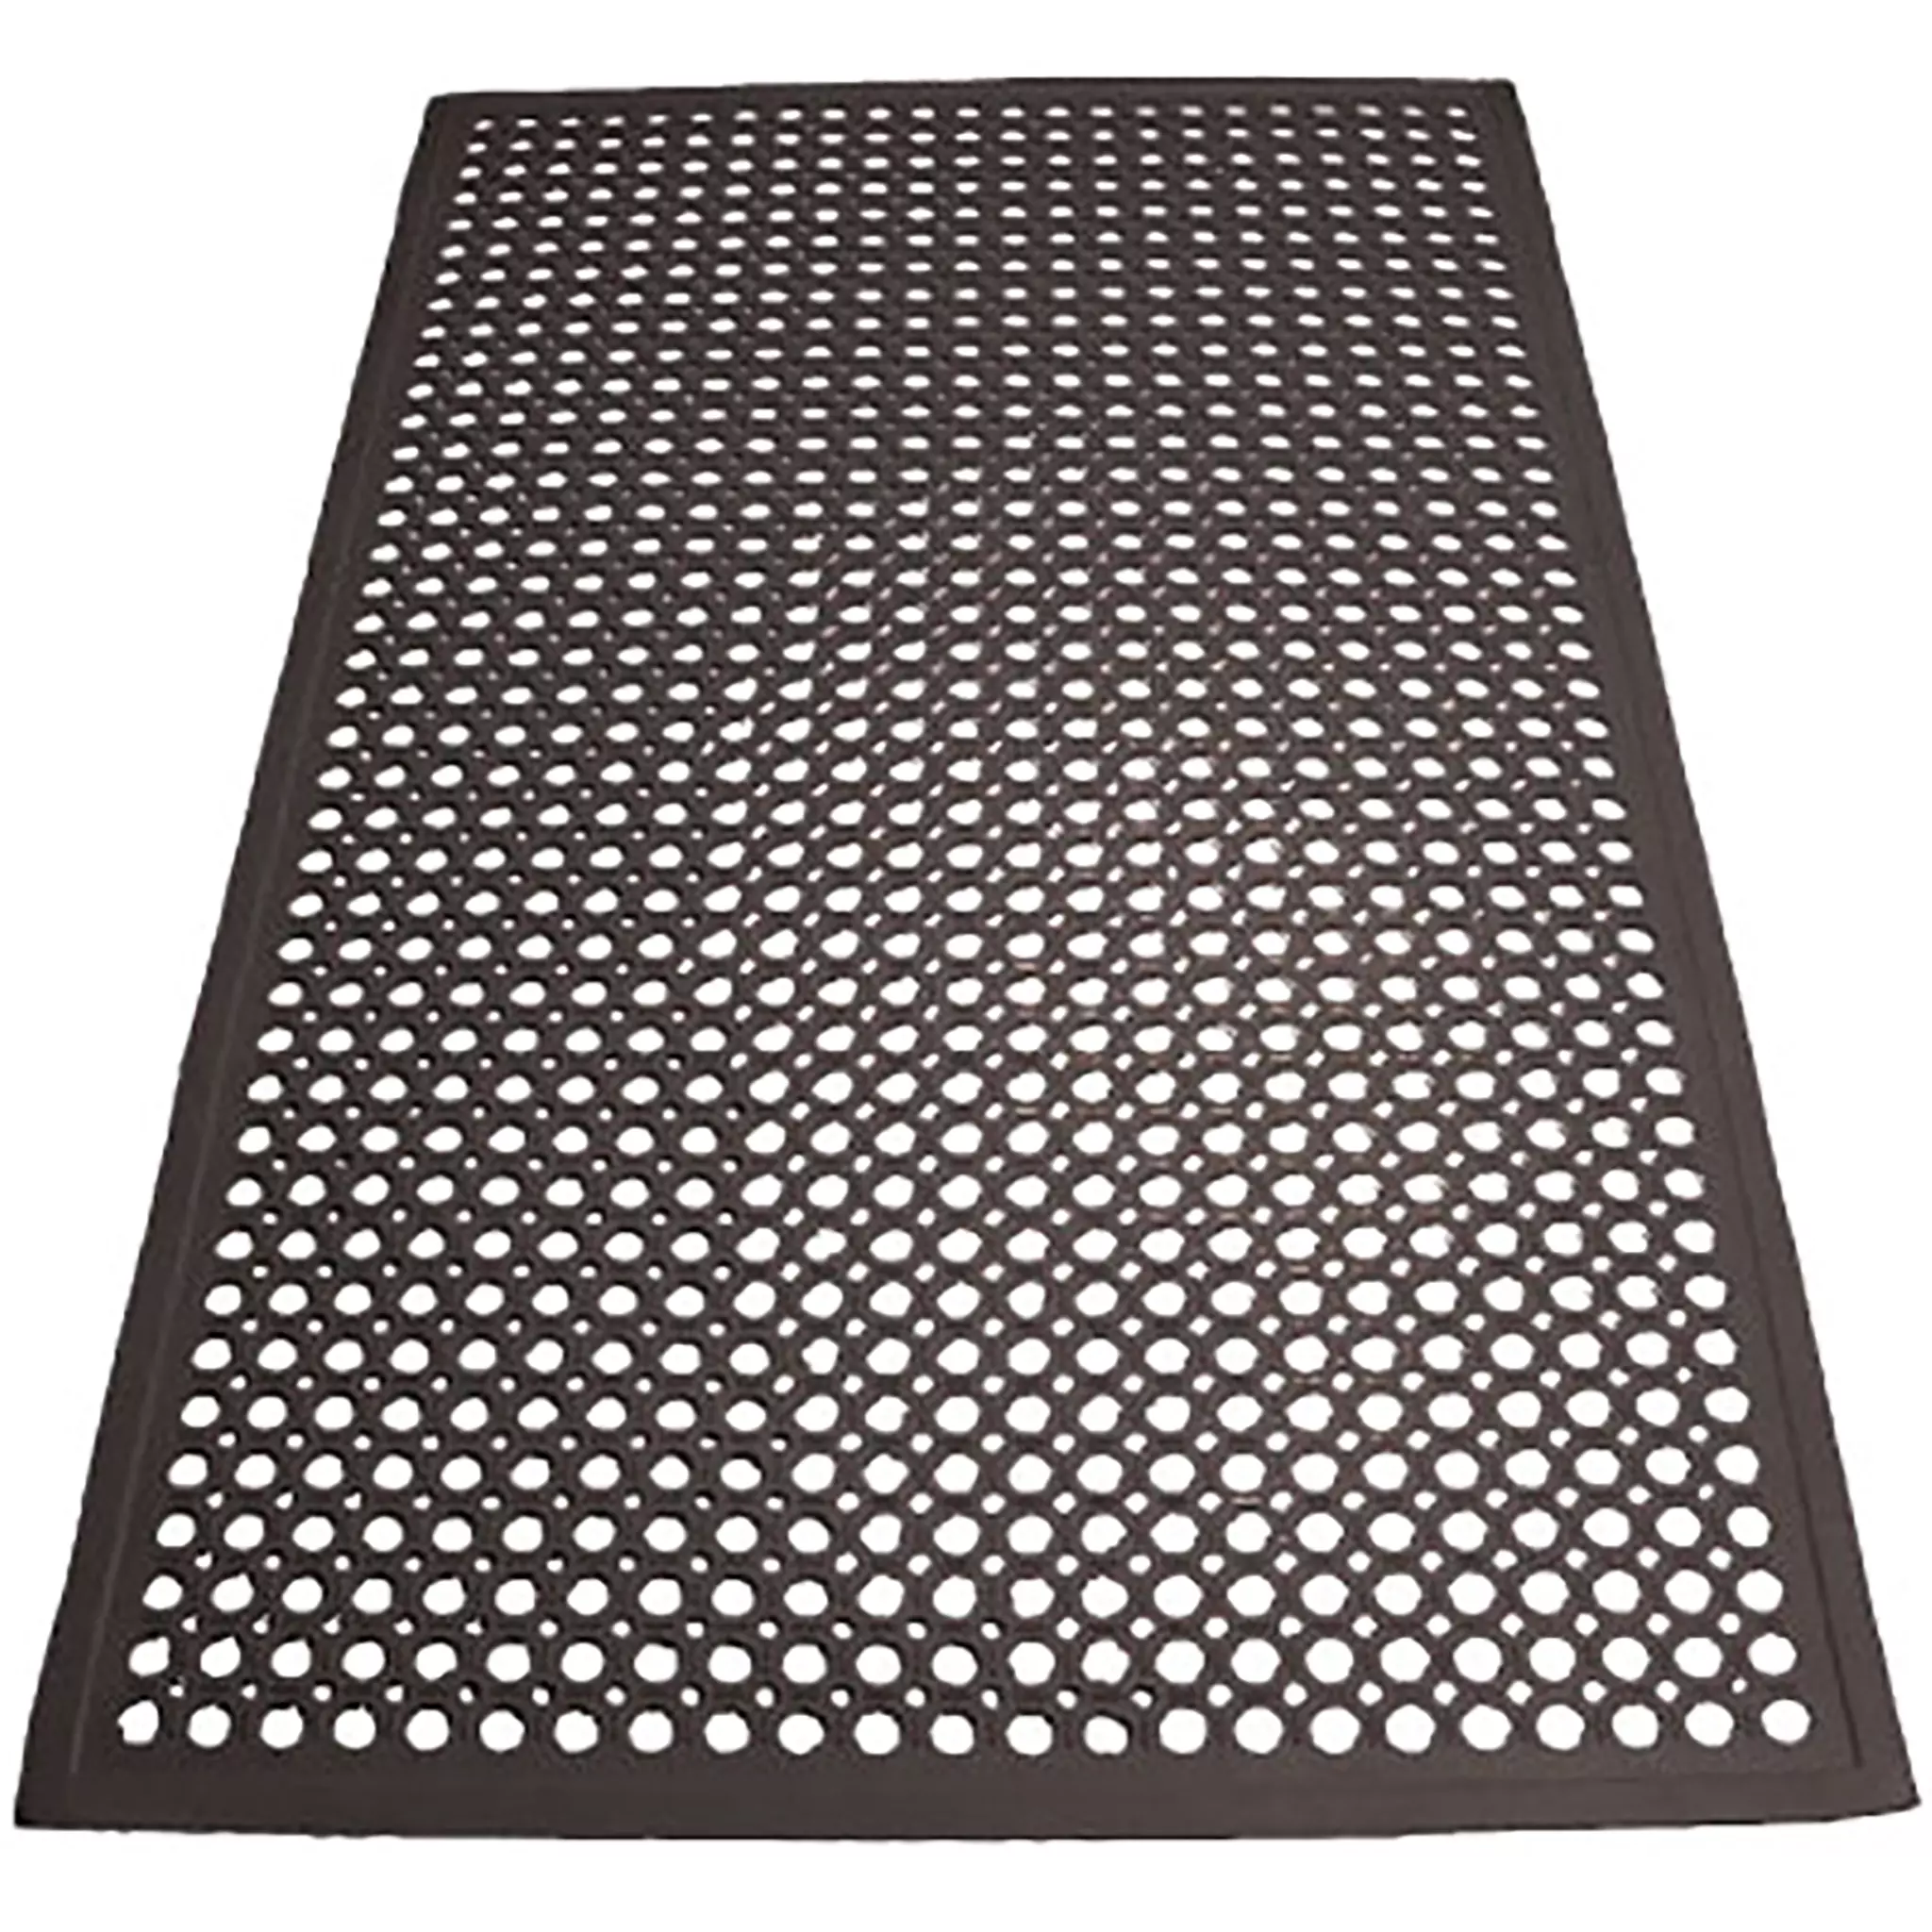 Winco Black Rubber Floor Mat With Beveled Edge